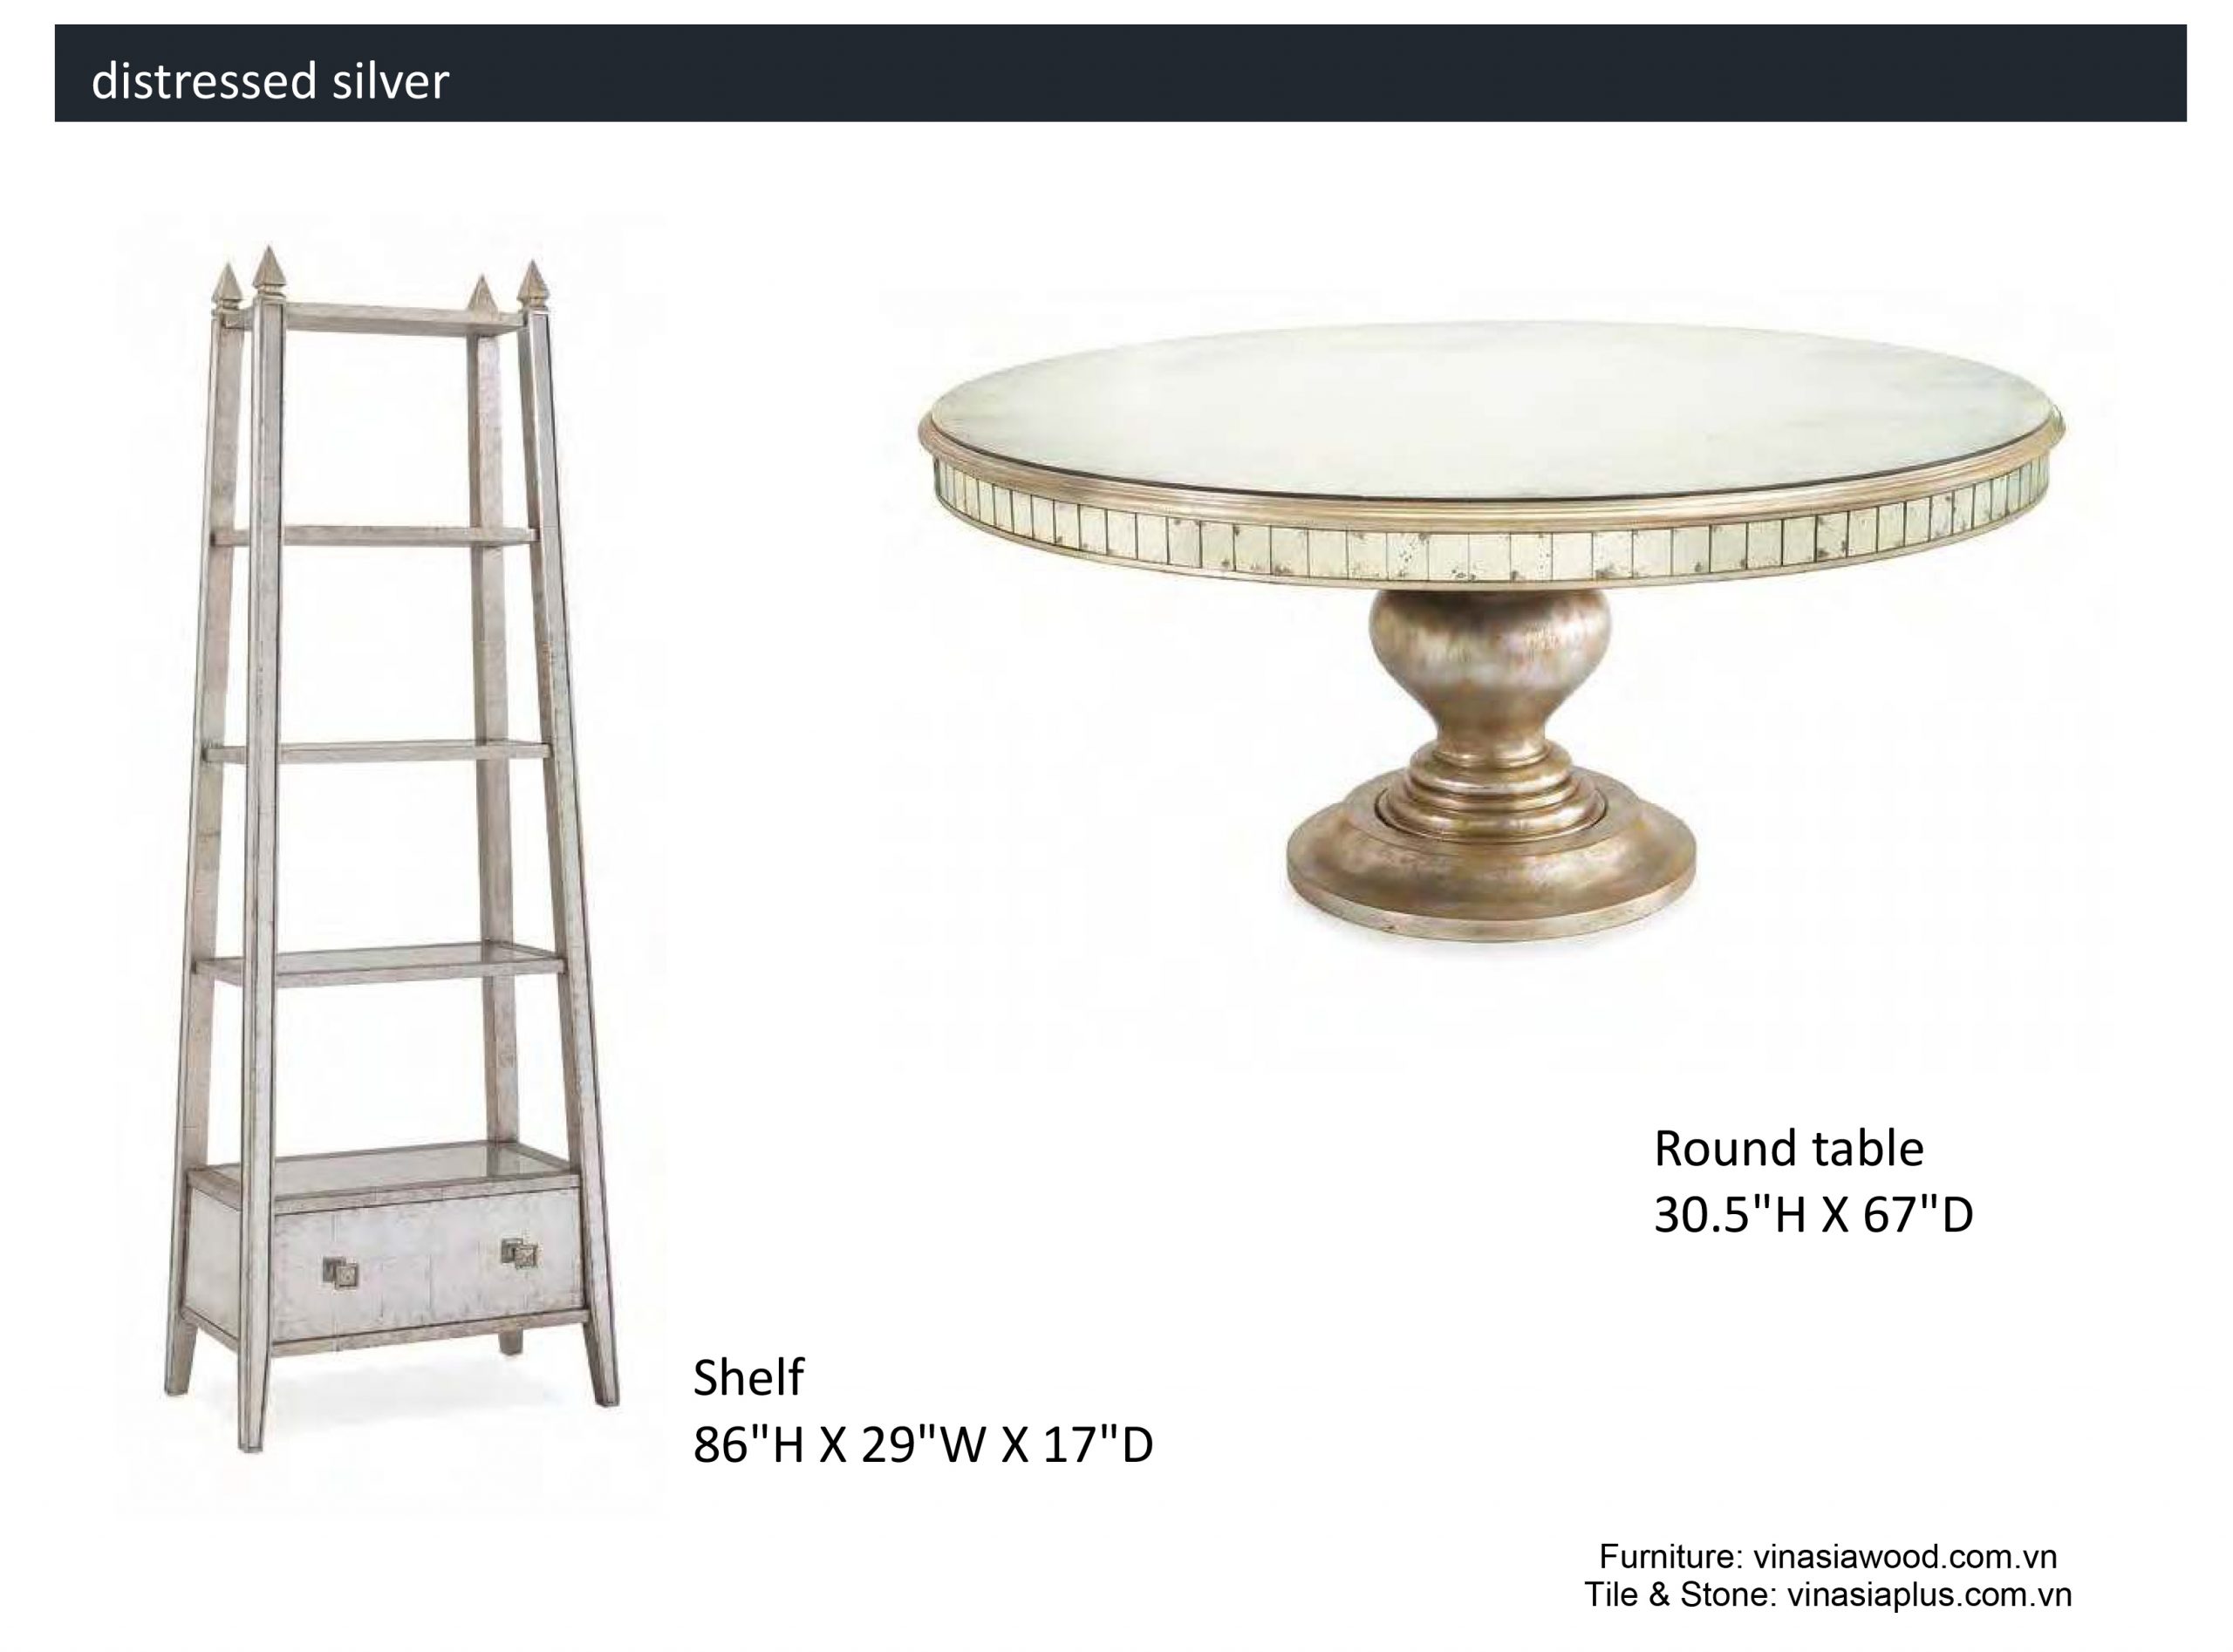 Distressed Silver - Antique styles furniture Vinasia Wood